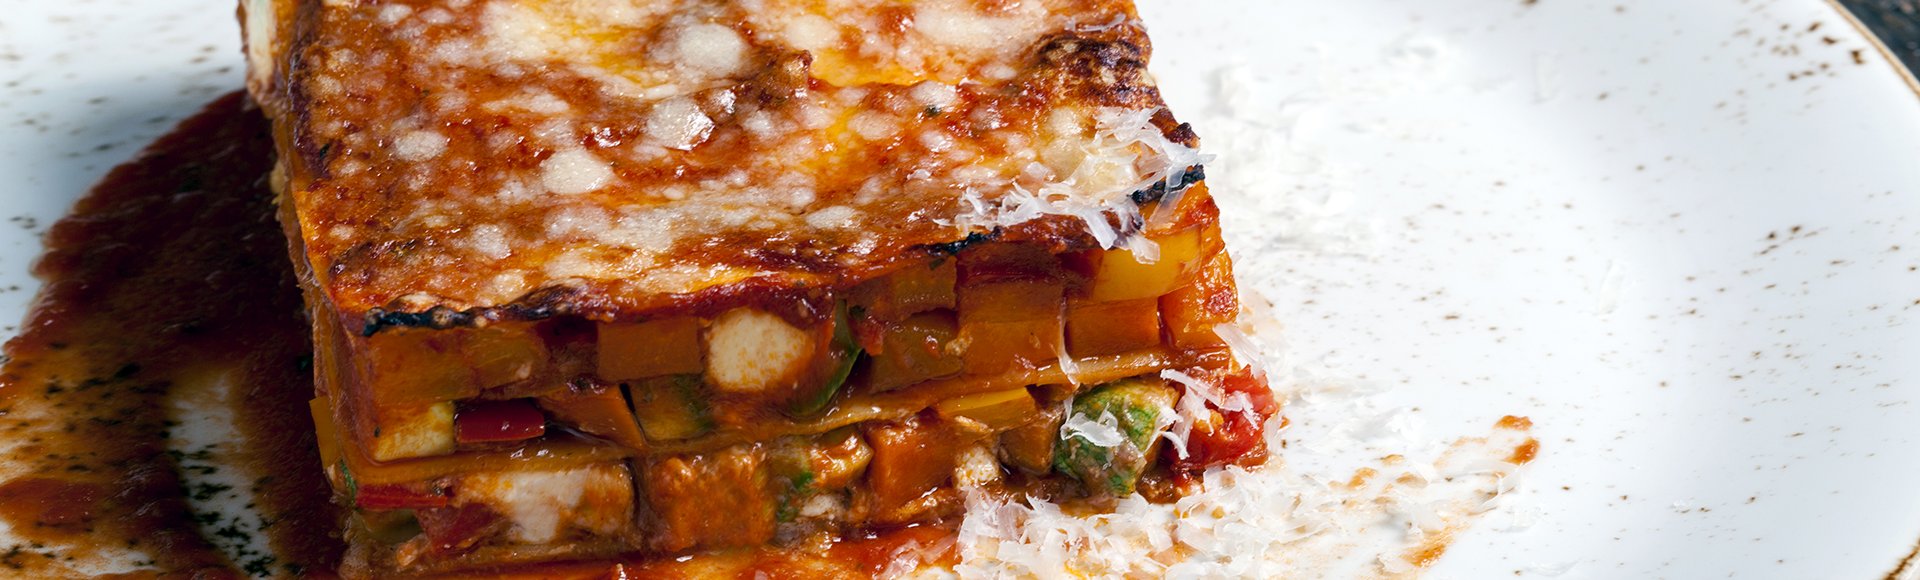 Lasagna with vegetables and xinomyzithra cheese